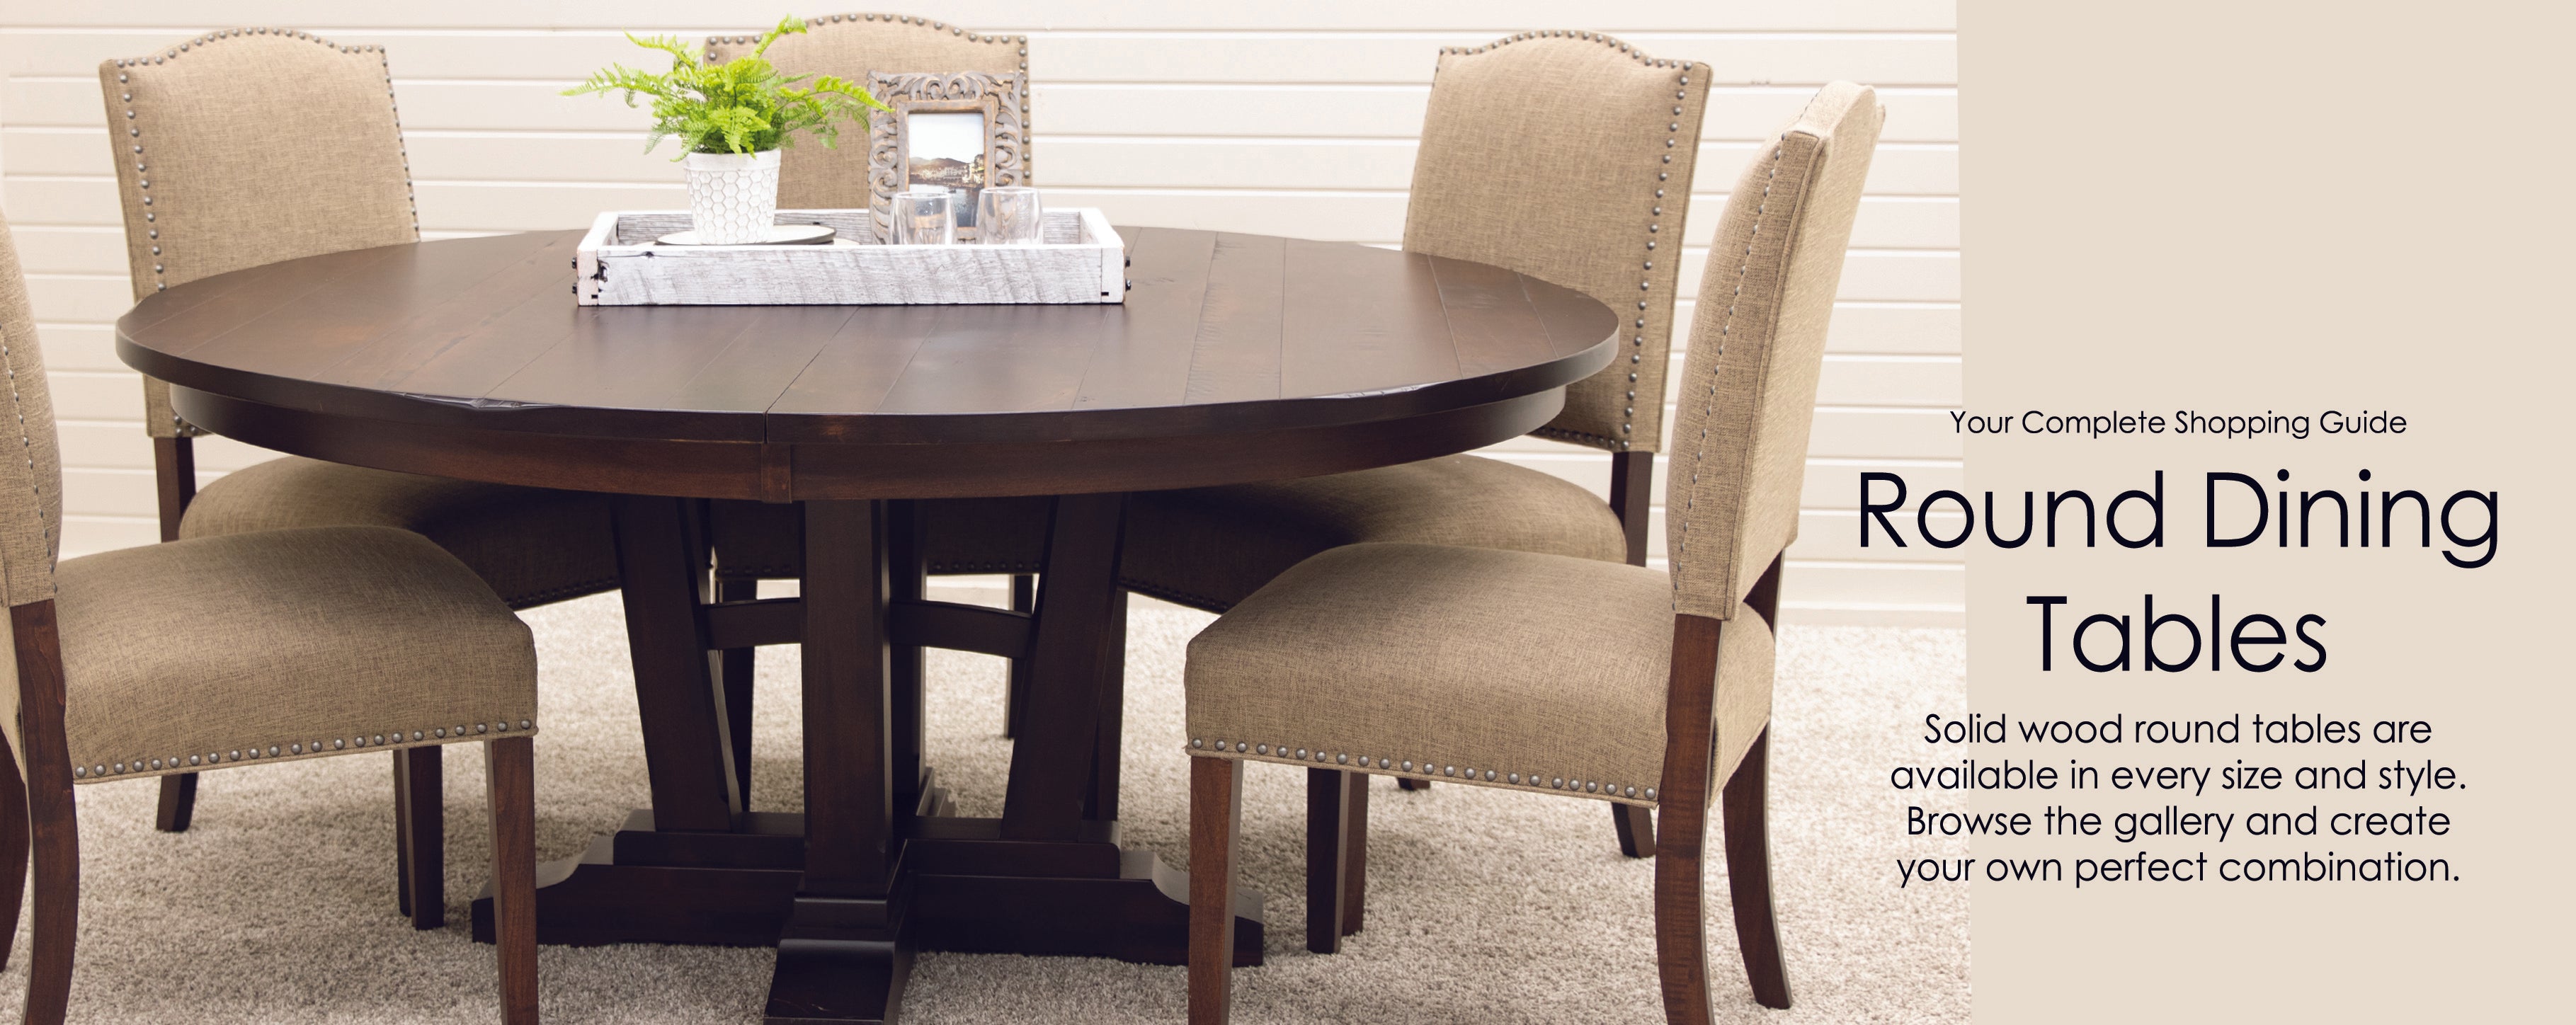 Extendable Round Dining Tables, solid Maple wood & upholstered dining chairs